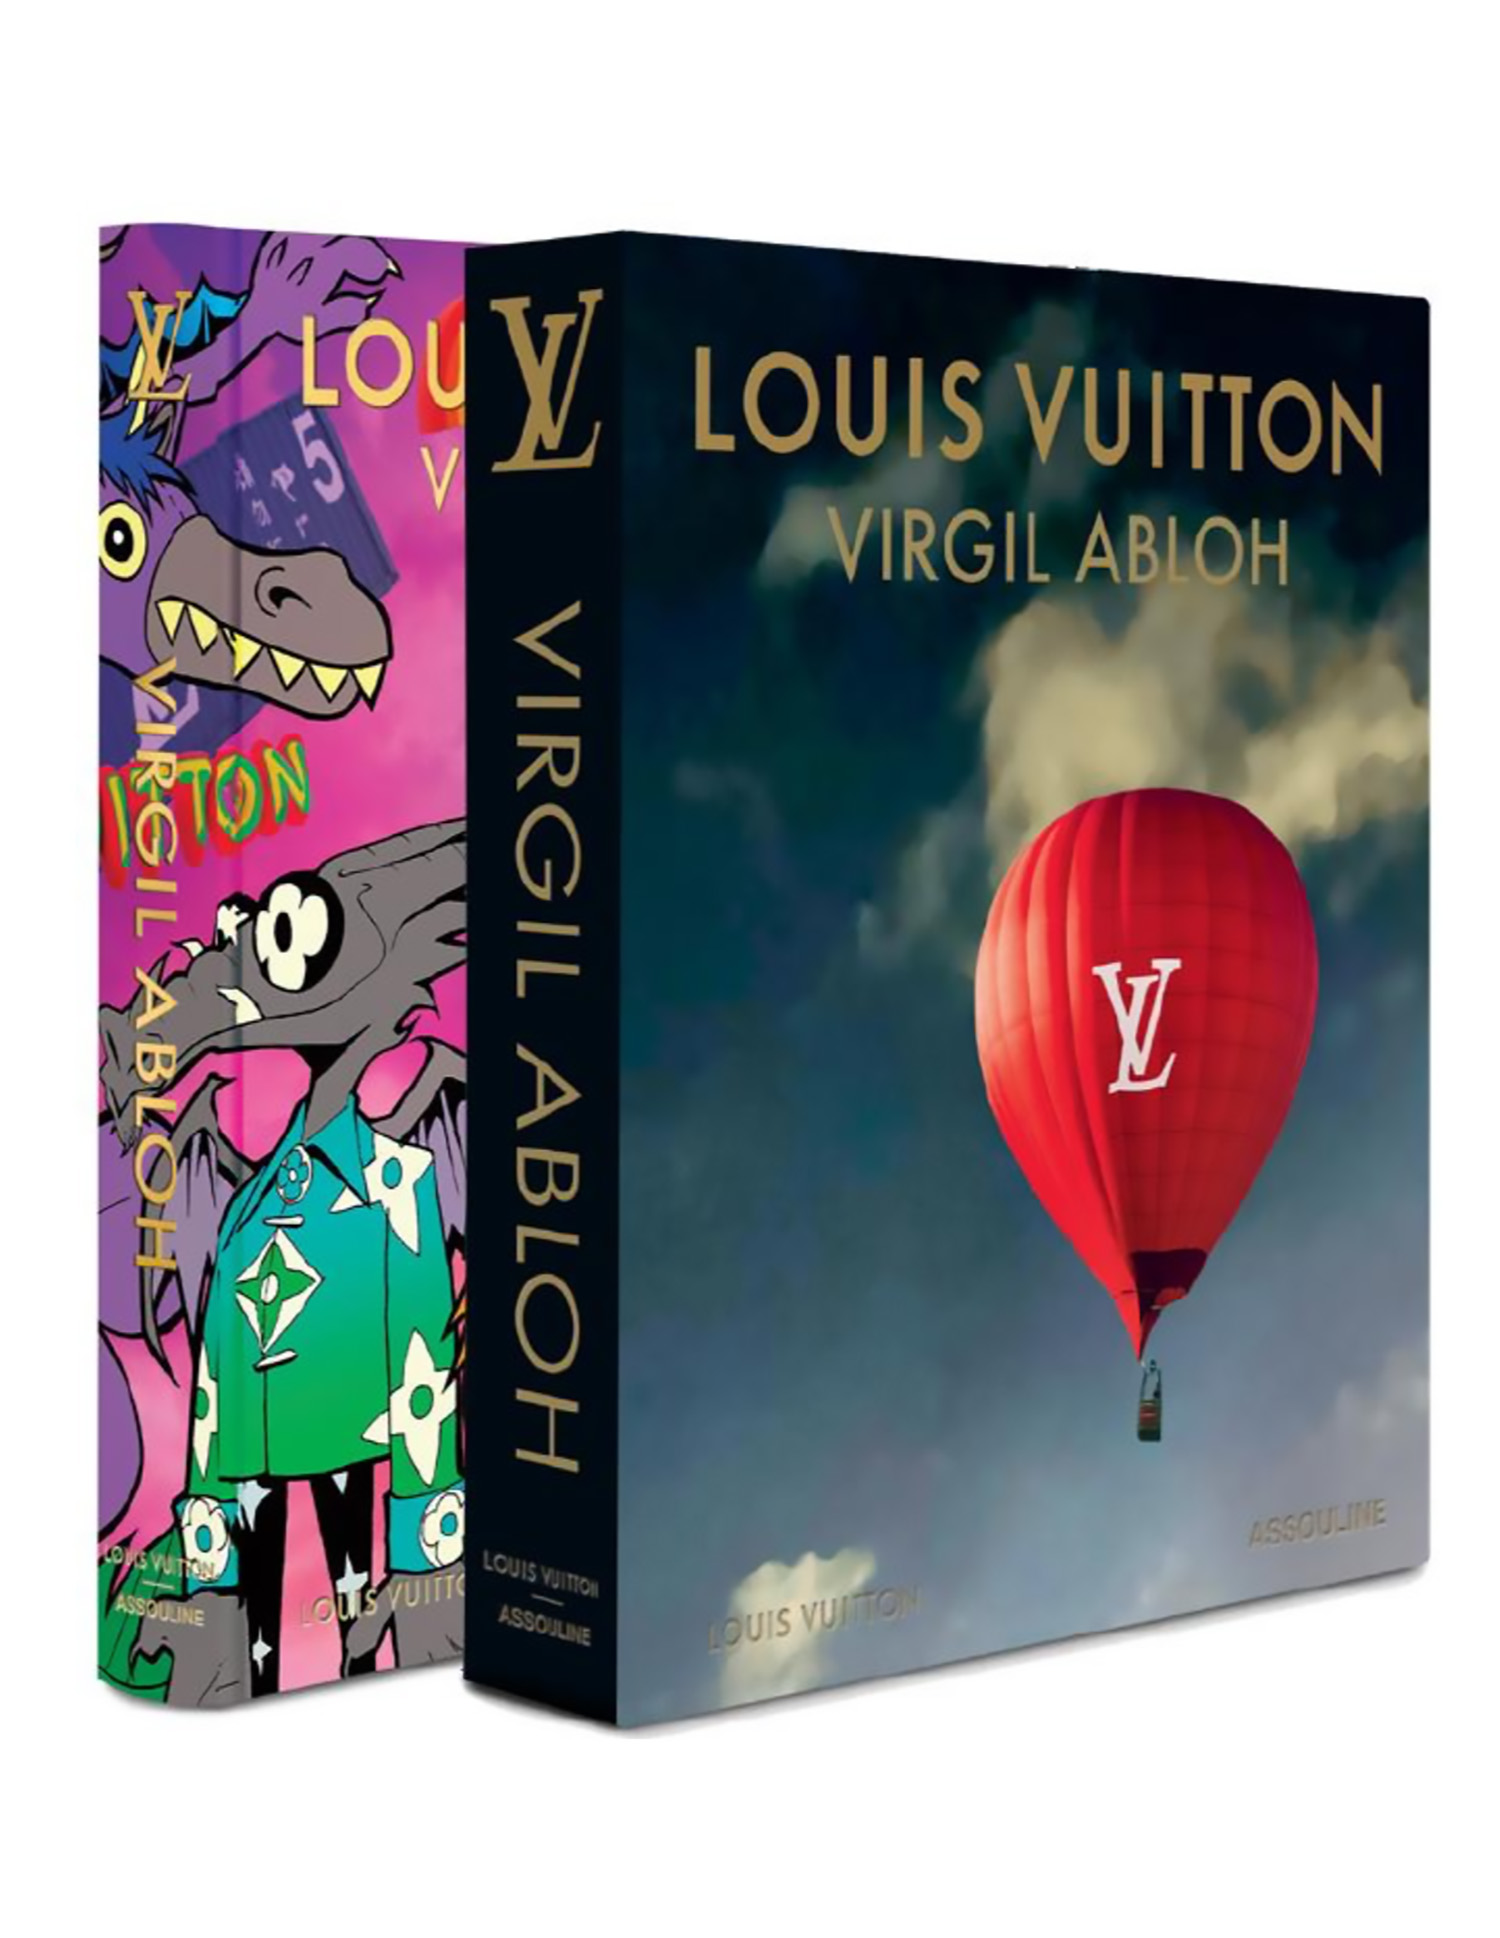 LOUIS VUITTON THE FIRST VIRGIL ABLOH BOOK | SWAG HOMMES